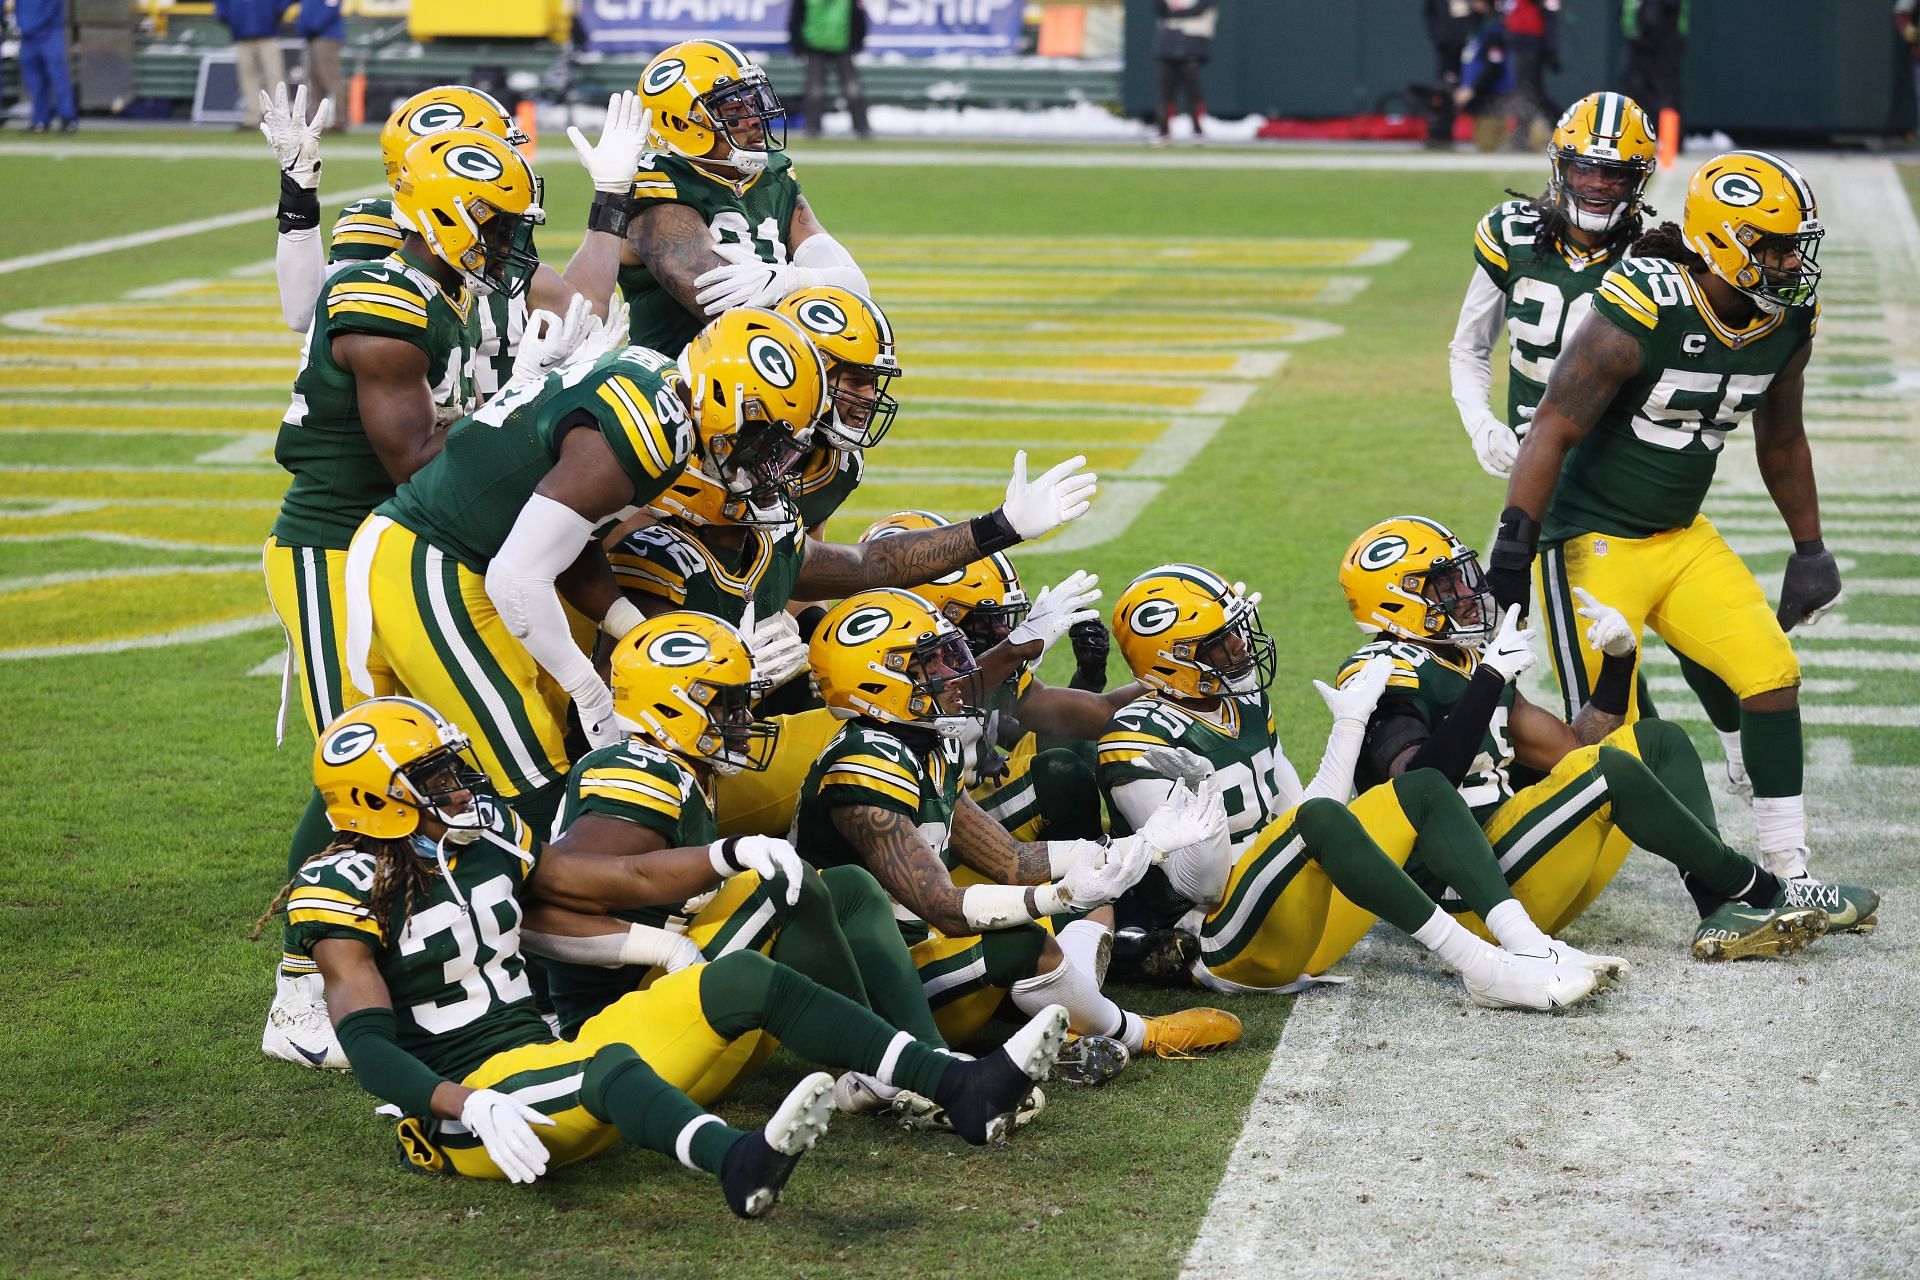 The Green Bay Packers may rely on a more run-heavy offense in 2022